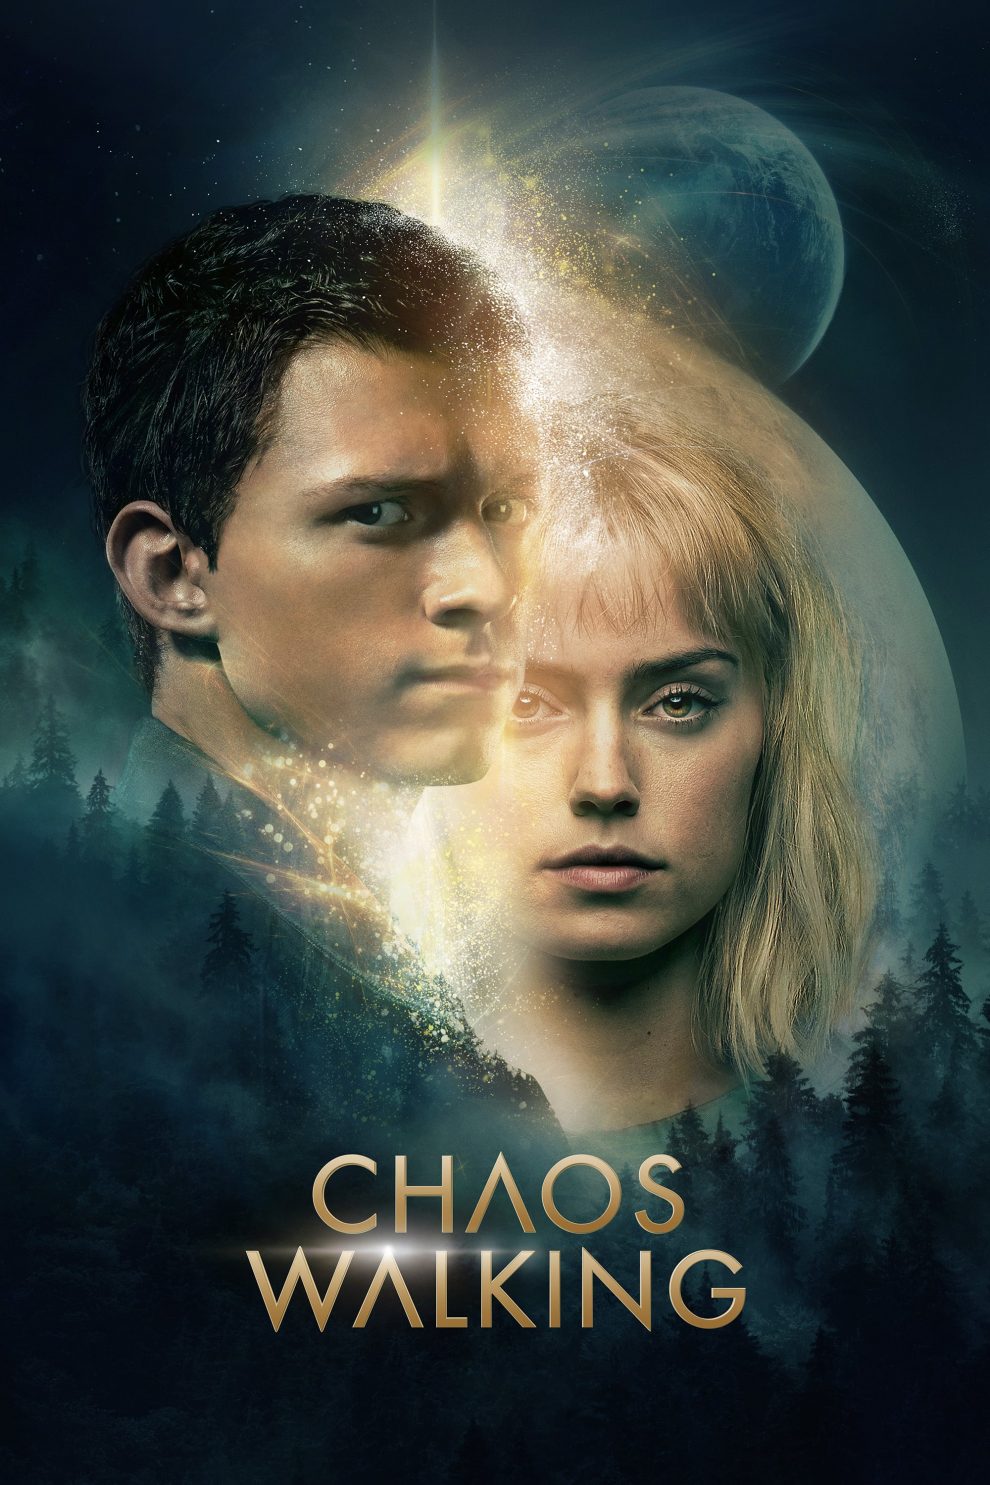 Poster for the movie "Chaos Walking"